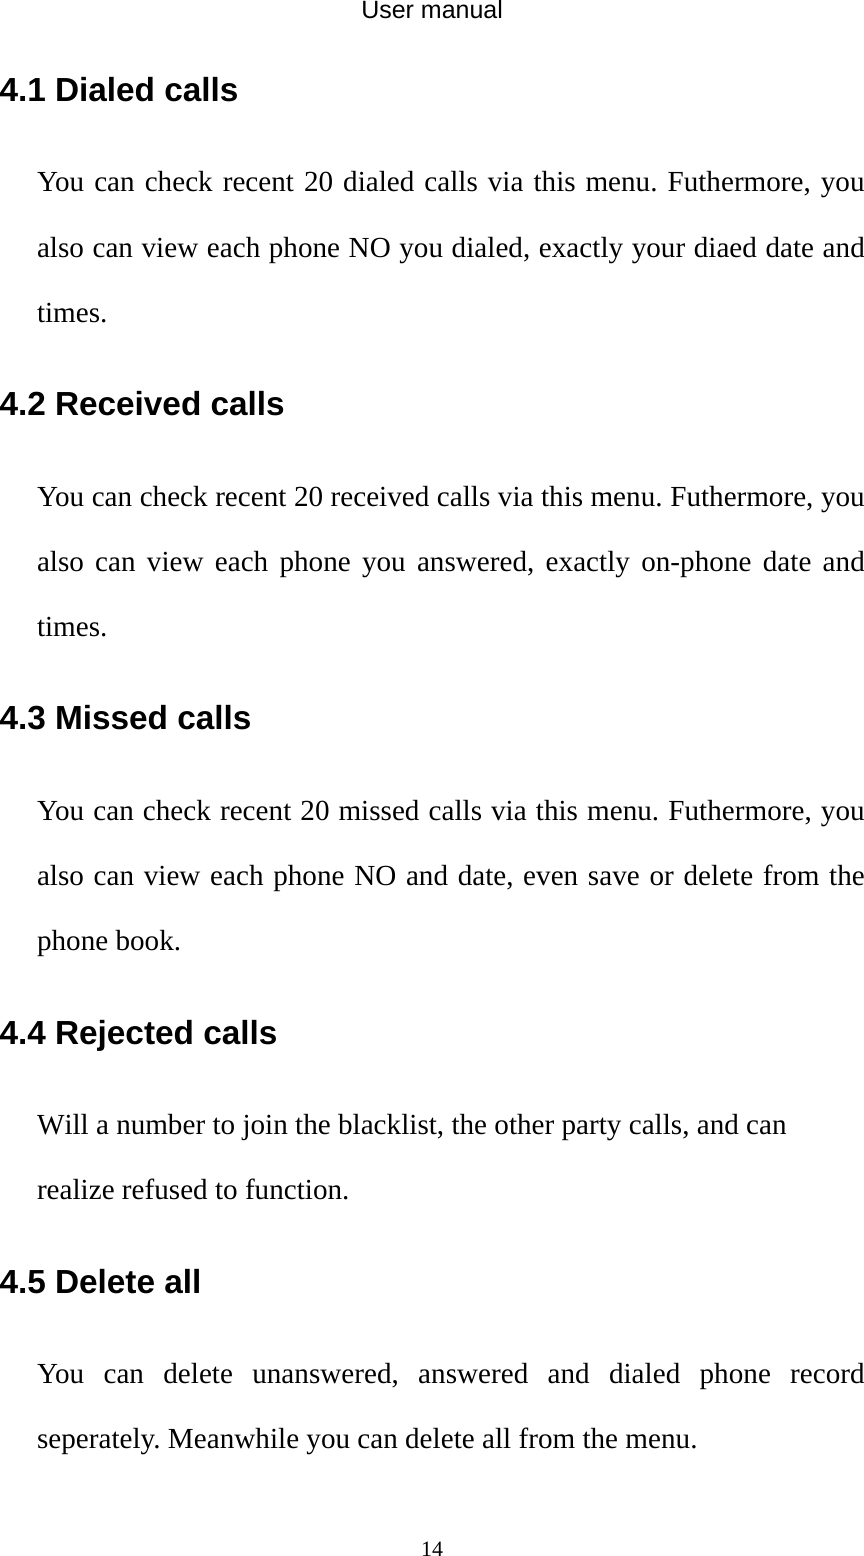 User manual  144.1 Dialed calls You can check recent 20 dialed calls via this menu. Futhermore, you also can view each phone NO you dialed, exactly your diaed date and times. 4.2 Received calls You can check recent 20 received calls via this menu. Futhermore, you also can view each phone you answered, exactly on-phone date and times. 4.3 Missed calls You can check recent 20 missed calls via this menu. Futhermore, you also can view each phone NO and date, even save or delete from the phone book. 4.4 Rejected calls Will a number to join the blacklist, the other party calls, and can realize refused to function. 4.5 Delete all     You can delete unanswered, answered and dialed phone record seperately. Meanwhile you can delete all from the menu. 